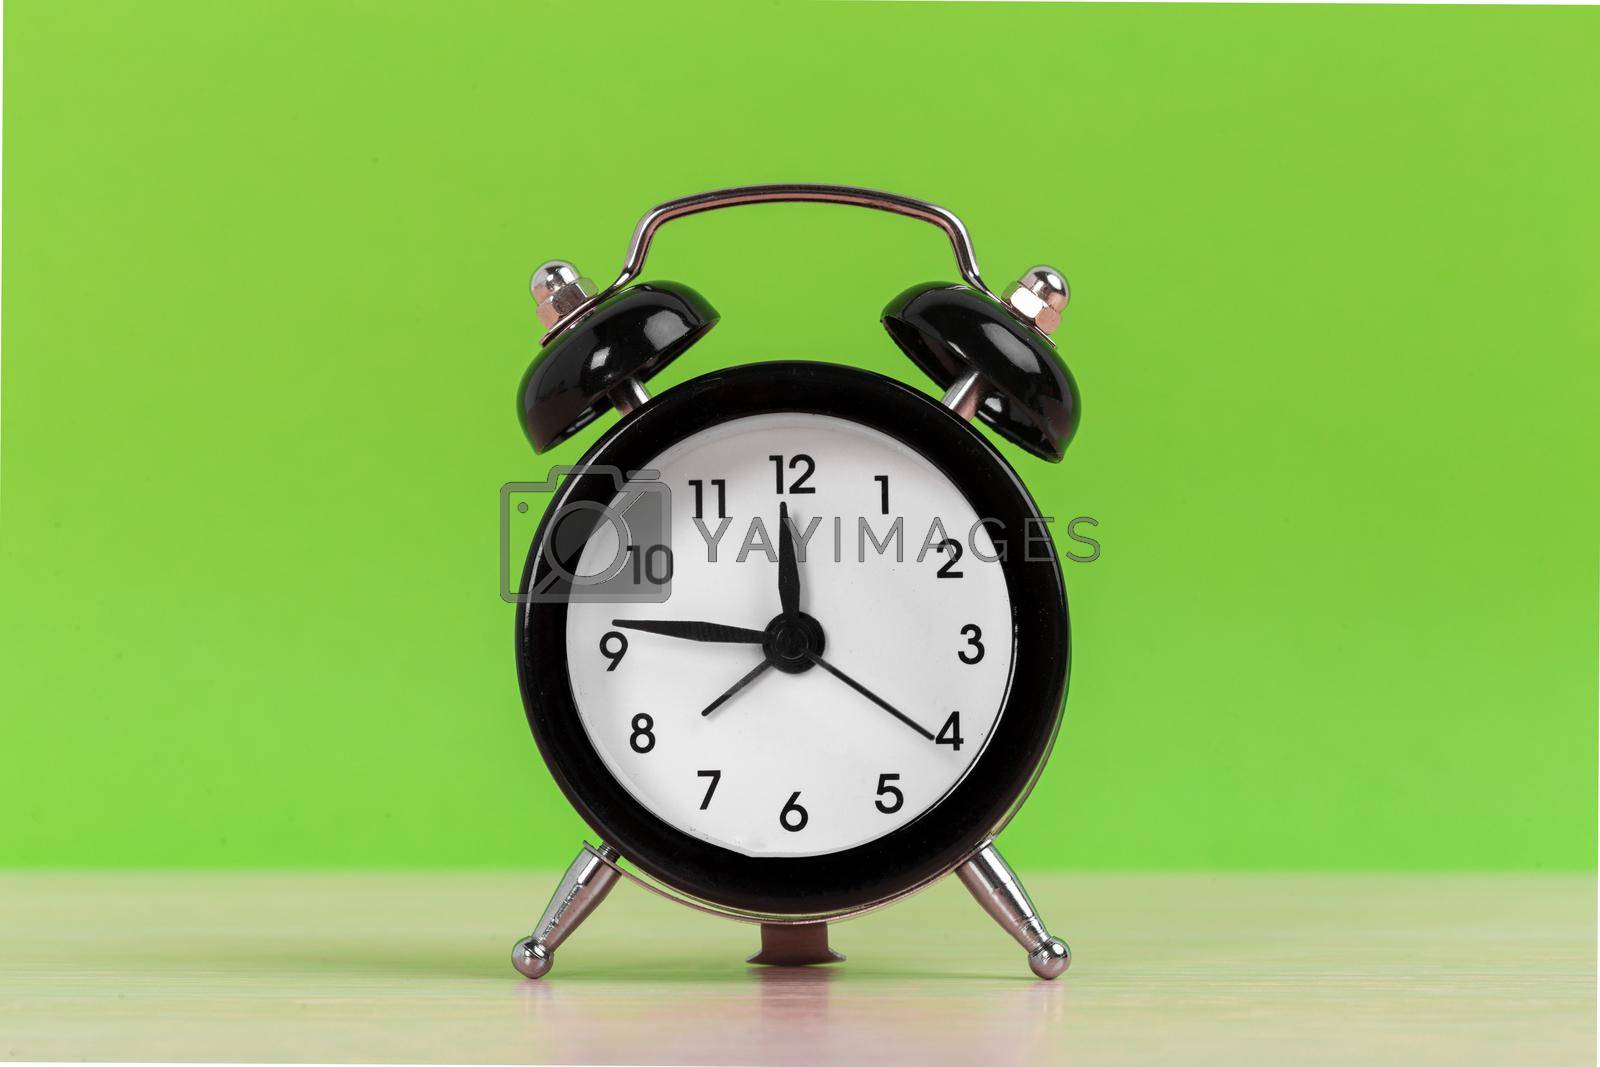 Royalty free image of Vintage black alarm clock on a bright green background by Fabrikasimf